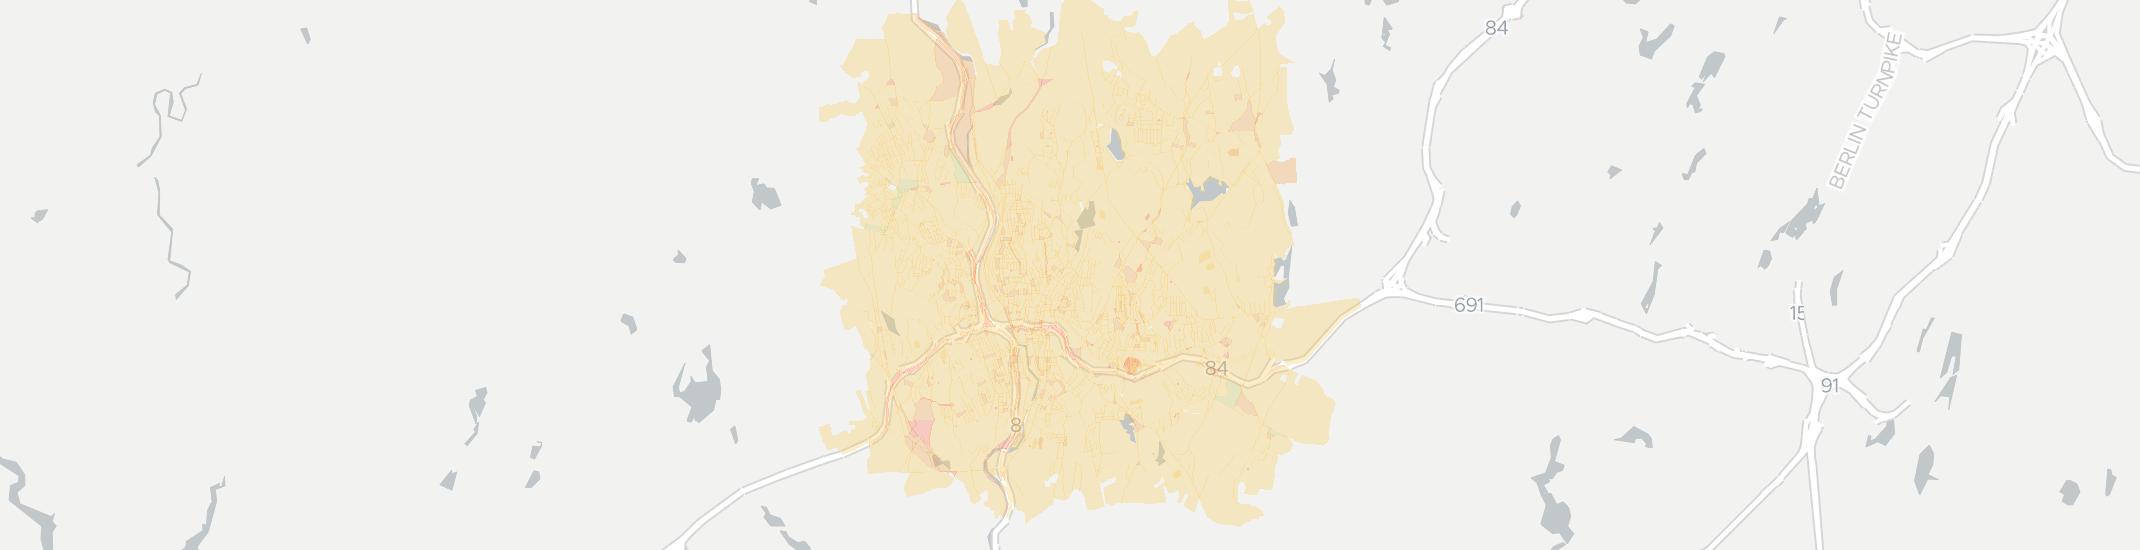 Waterbury Internet Competition Map. Click for interactive map